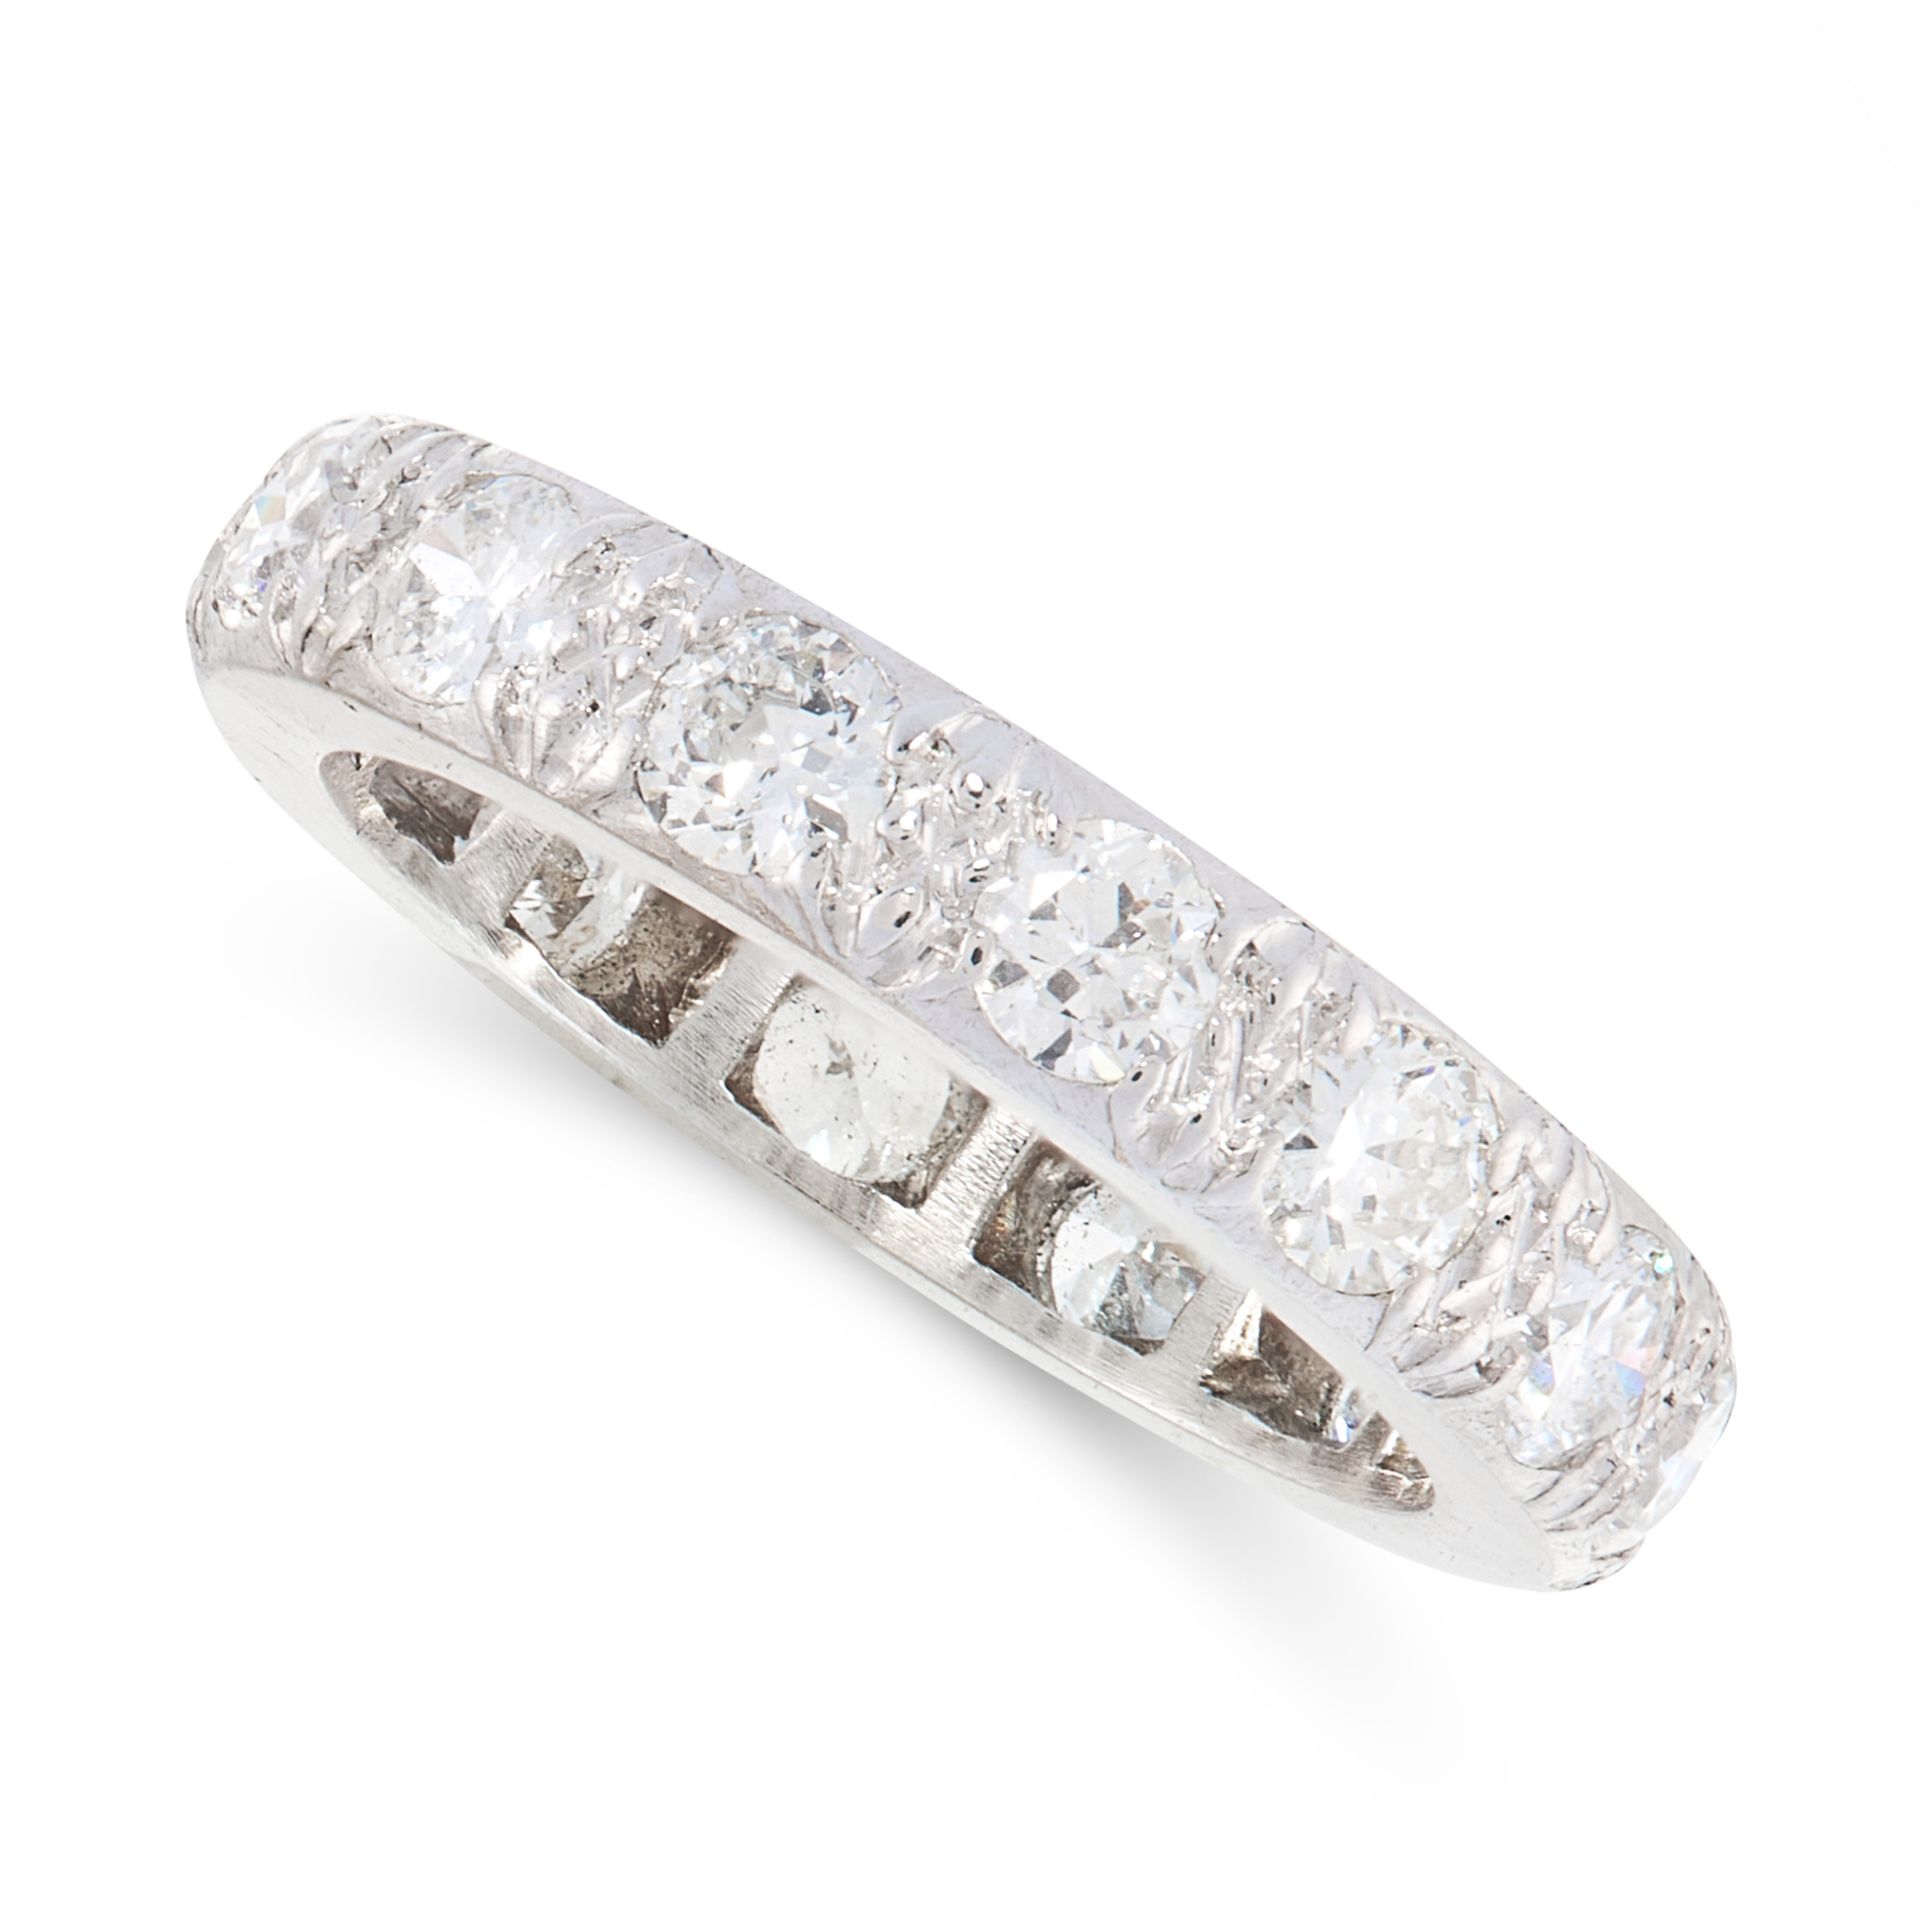 A DIAMOND ETERNITY BAND RING comprising a single row of round cut diamonds, all totalling 1.6-1.8